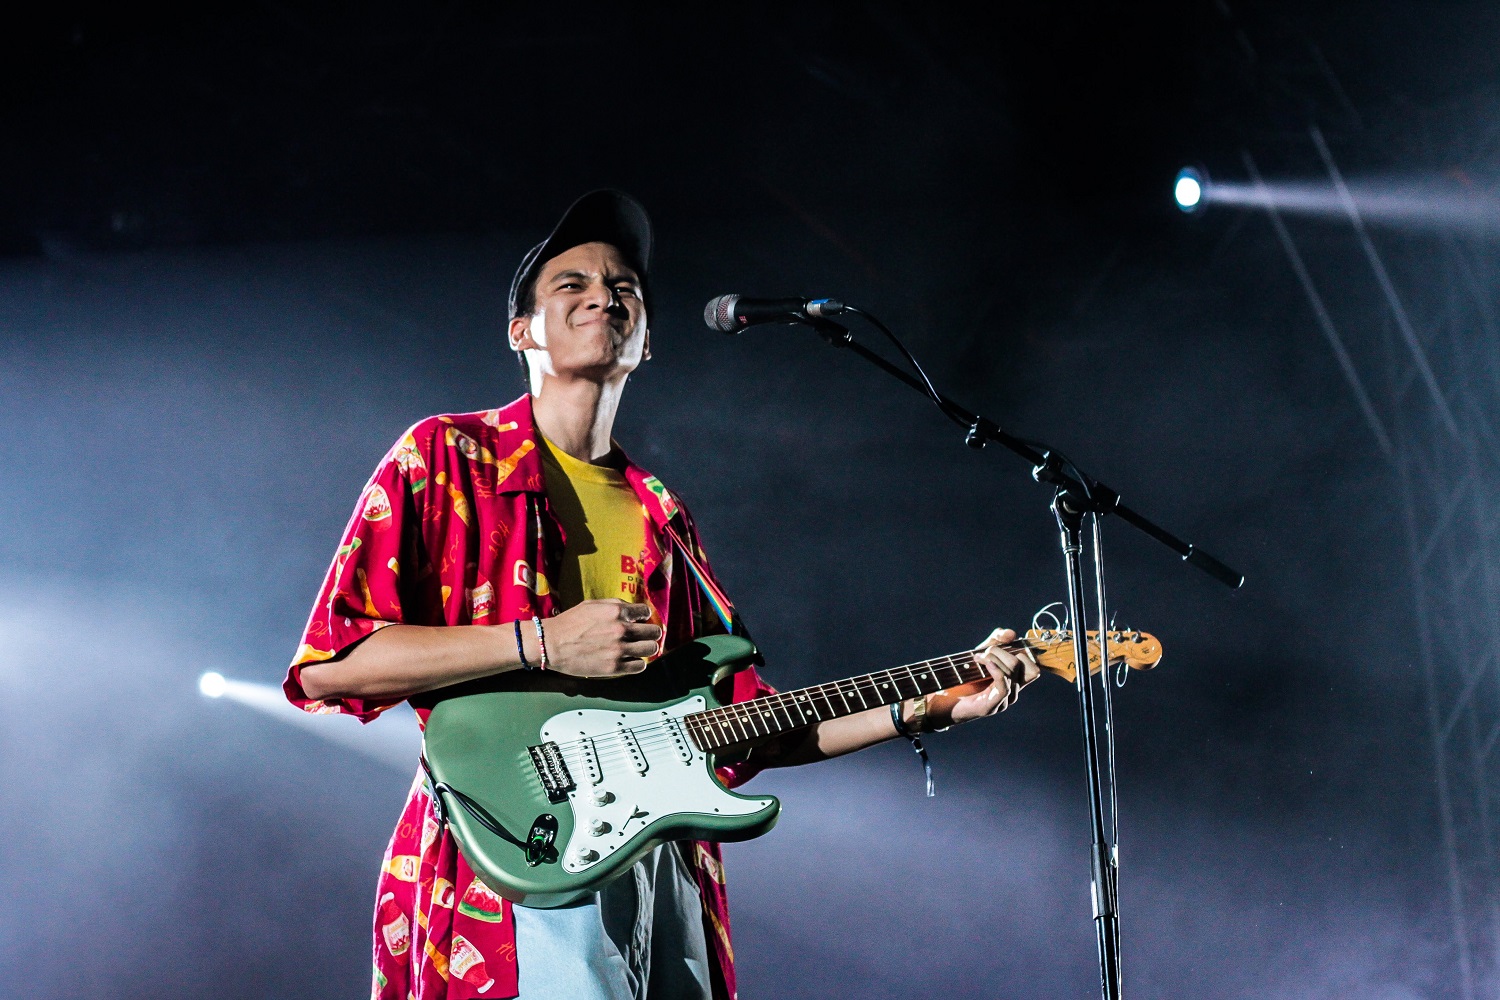 Rising star “Lover Boy” Phum Viphurit performs his sweet, soulful vocals in November 2019 at the Maho Rasop Festival. Photo: Coconuts